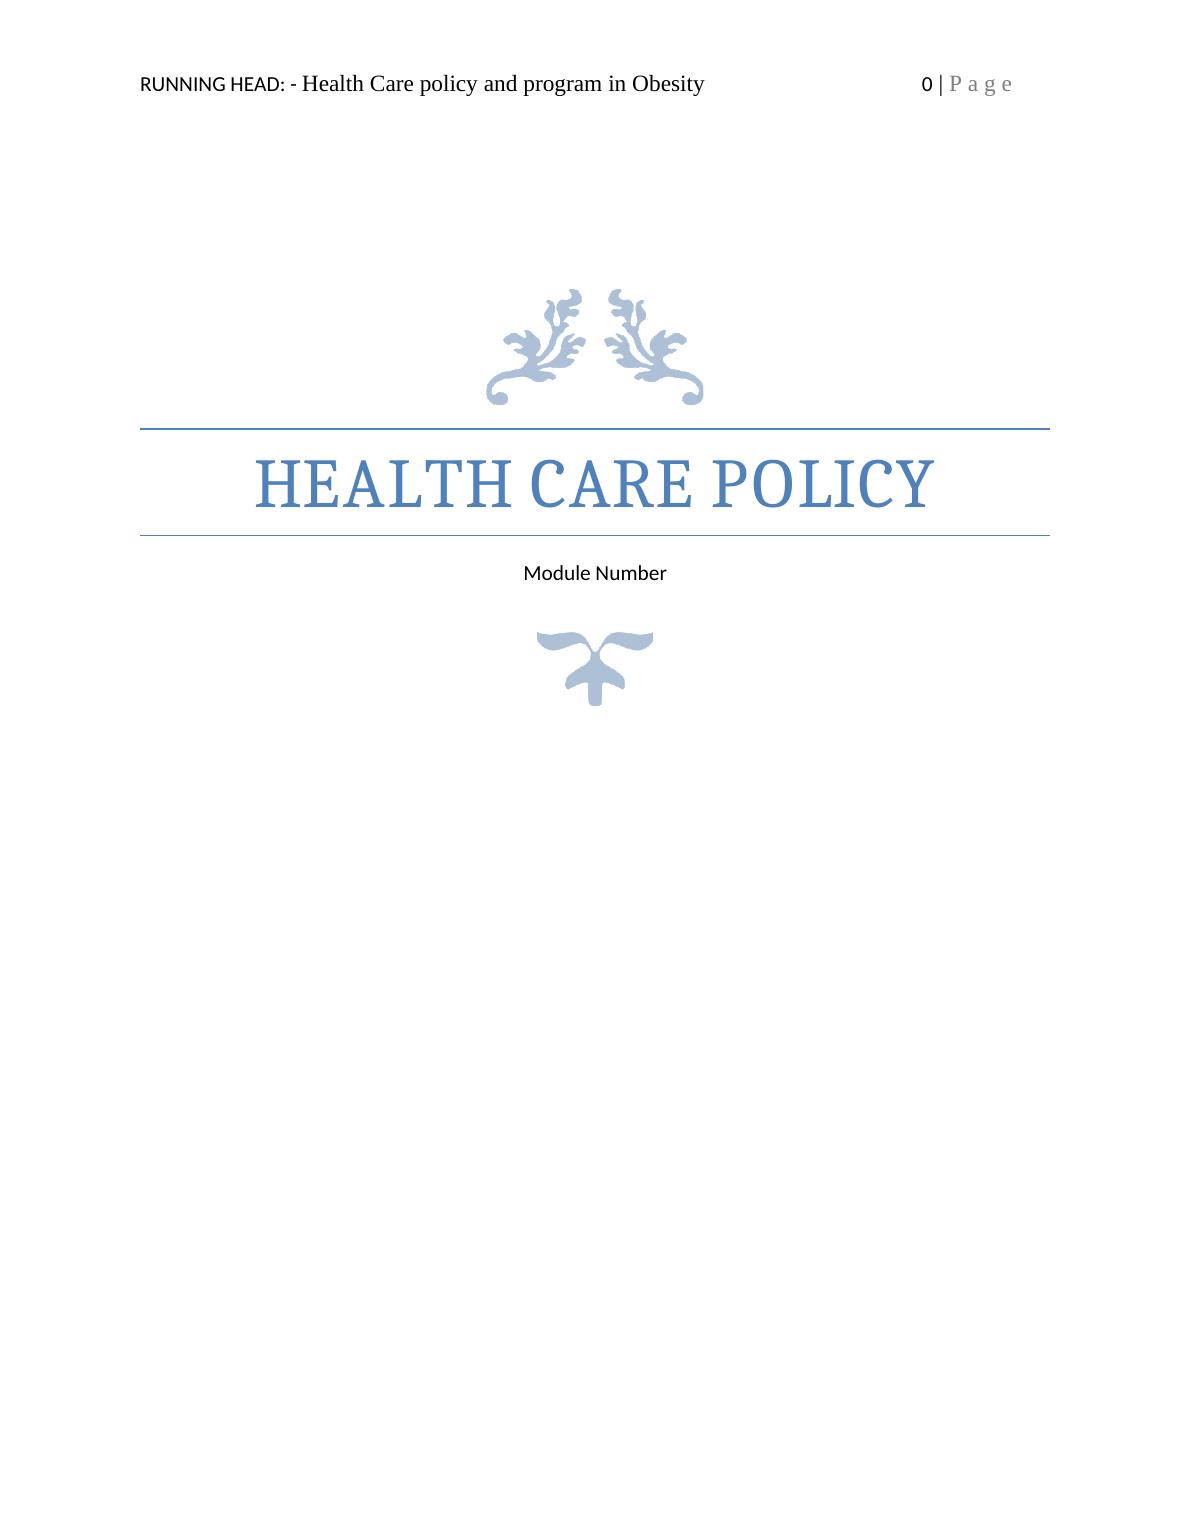 Health Care Policy and Program in Obesity Case Study 2022_1